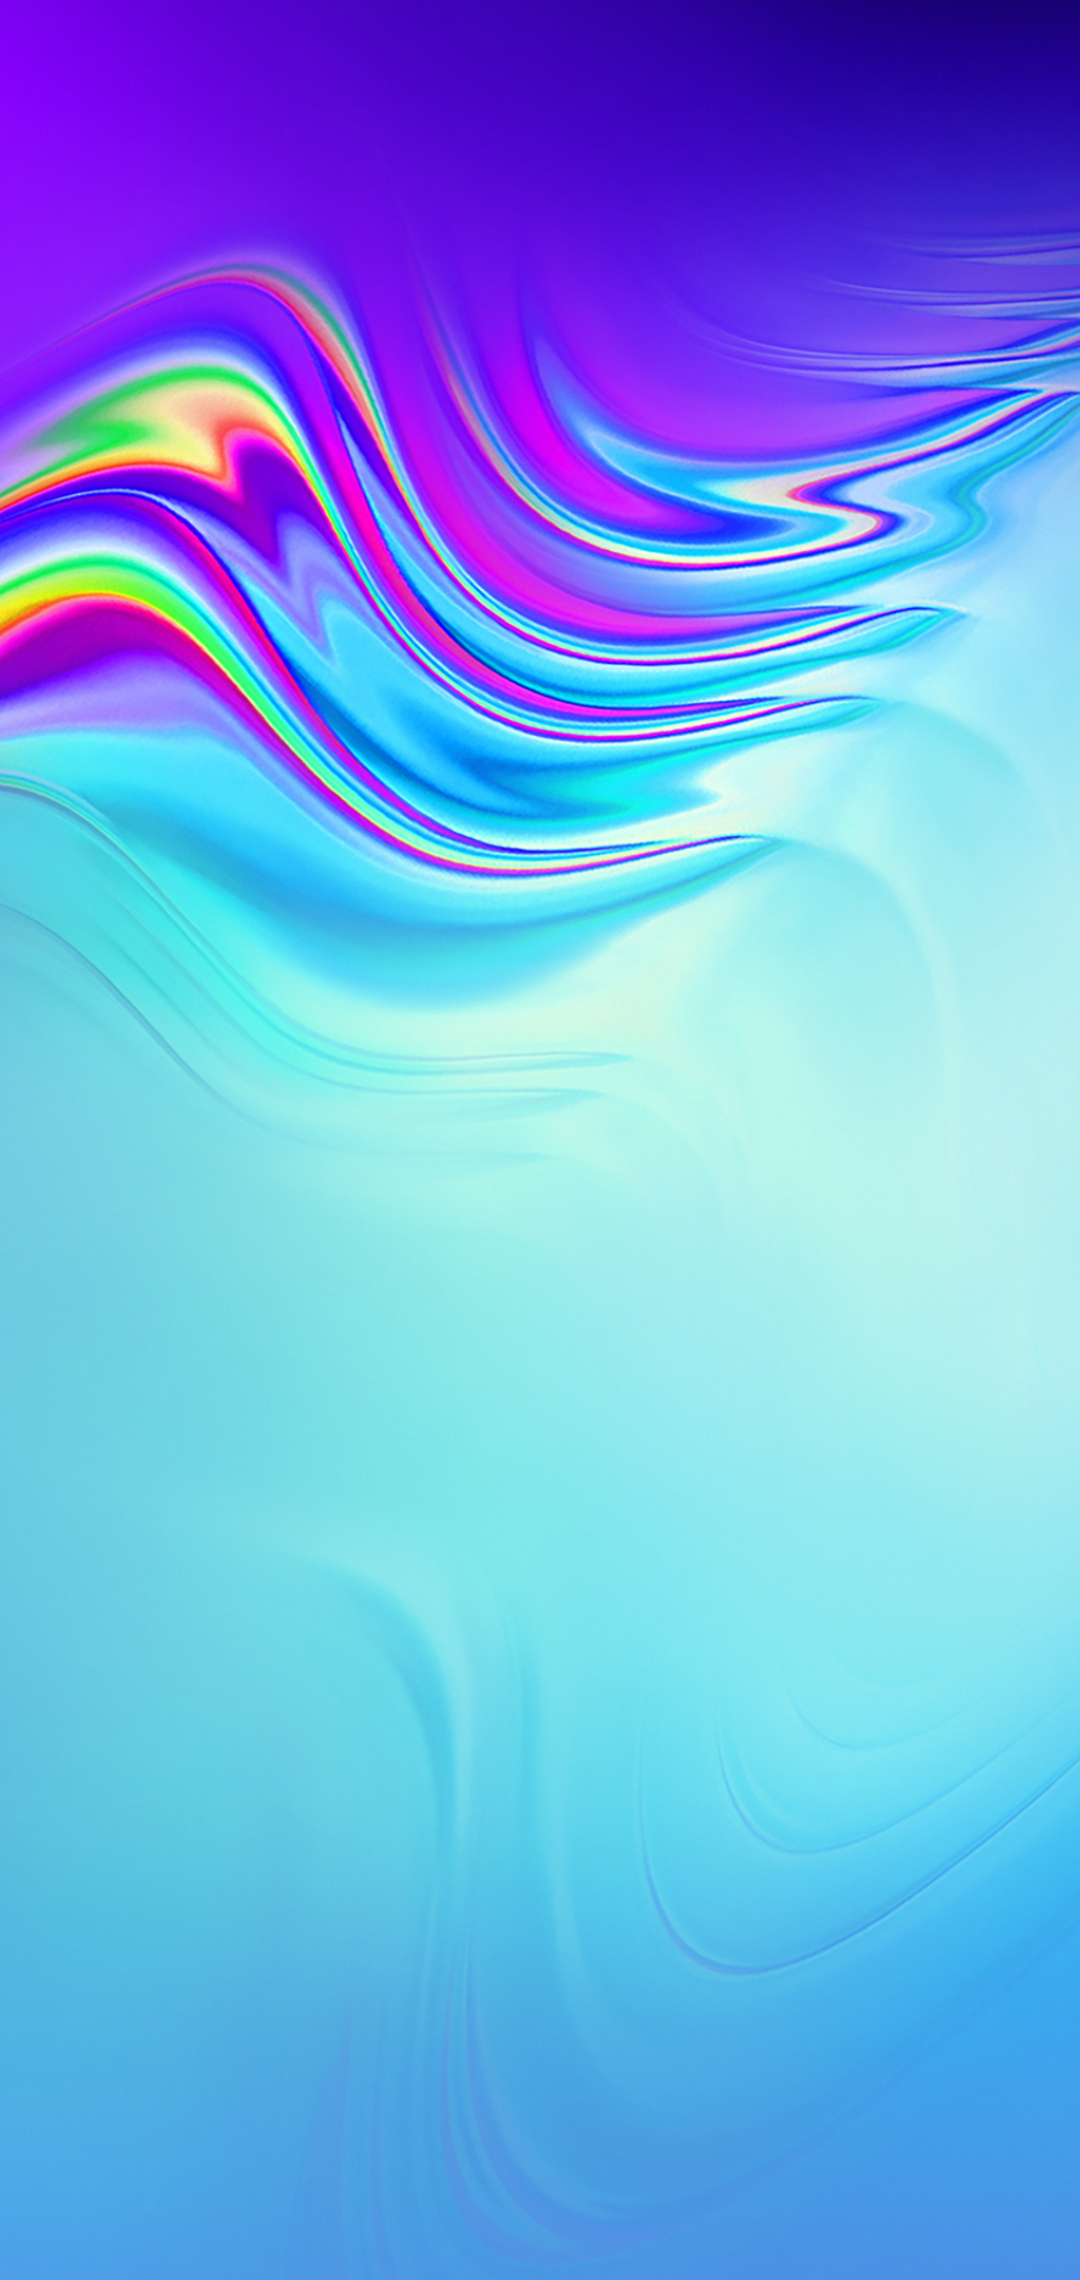 1080x2280 Stock Gradient Galaxy S10 One Plus 6,Huawei p20,Honor view 10